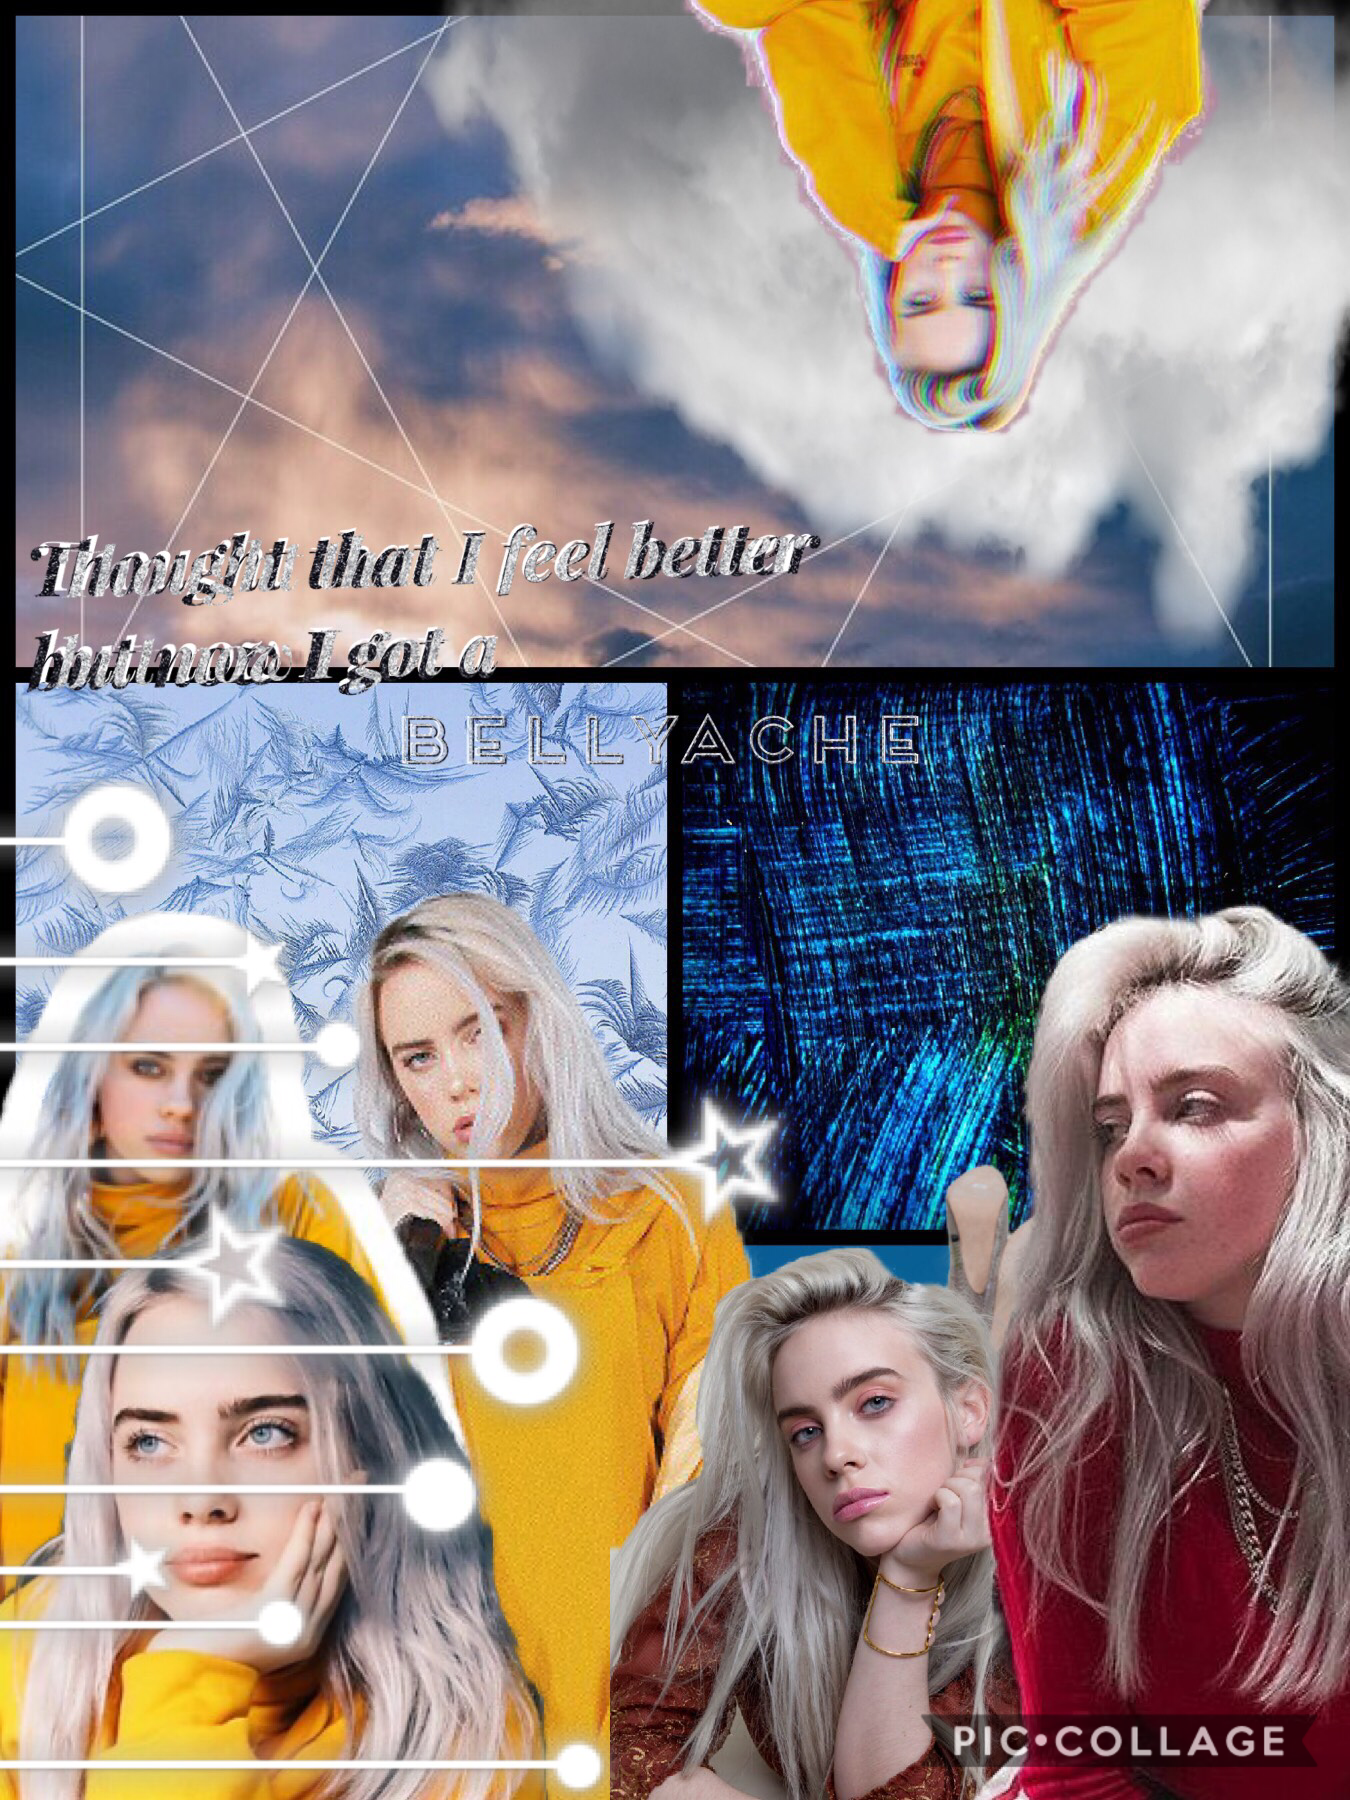 Thought that I feel better but now I got a bellyache 
If you love this song or love Billie like the post💕😊. Btw I love her so I might post about her a lot.